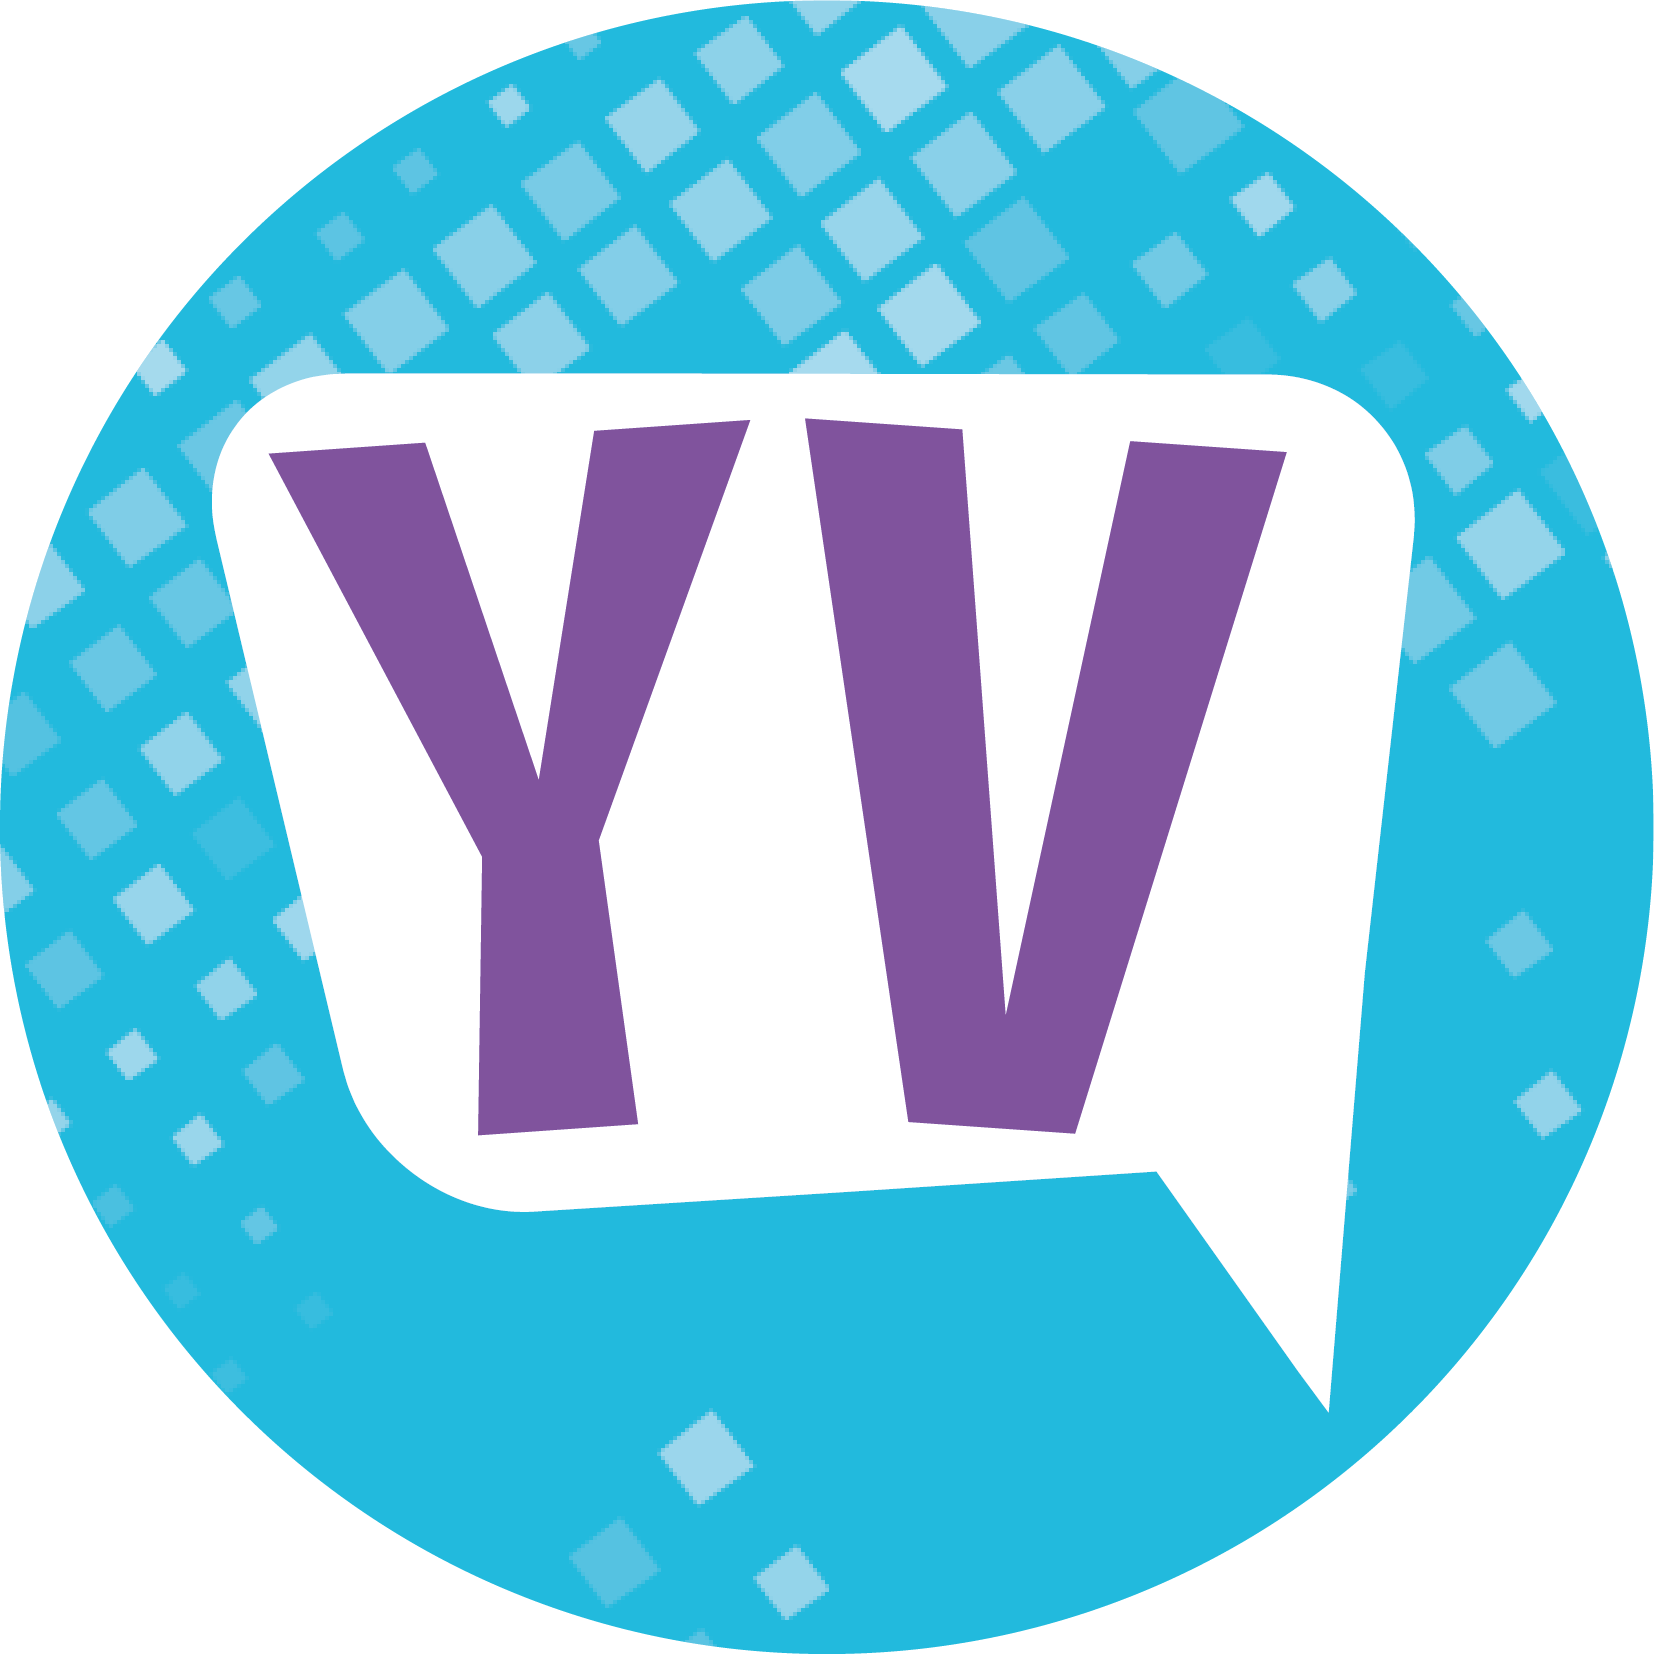 Dorset Youth Voice logo on a pale blue background